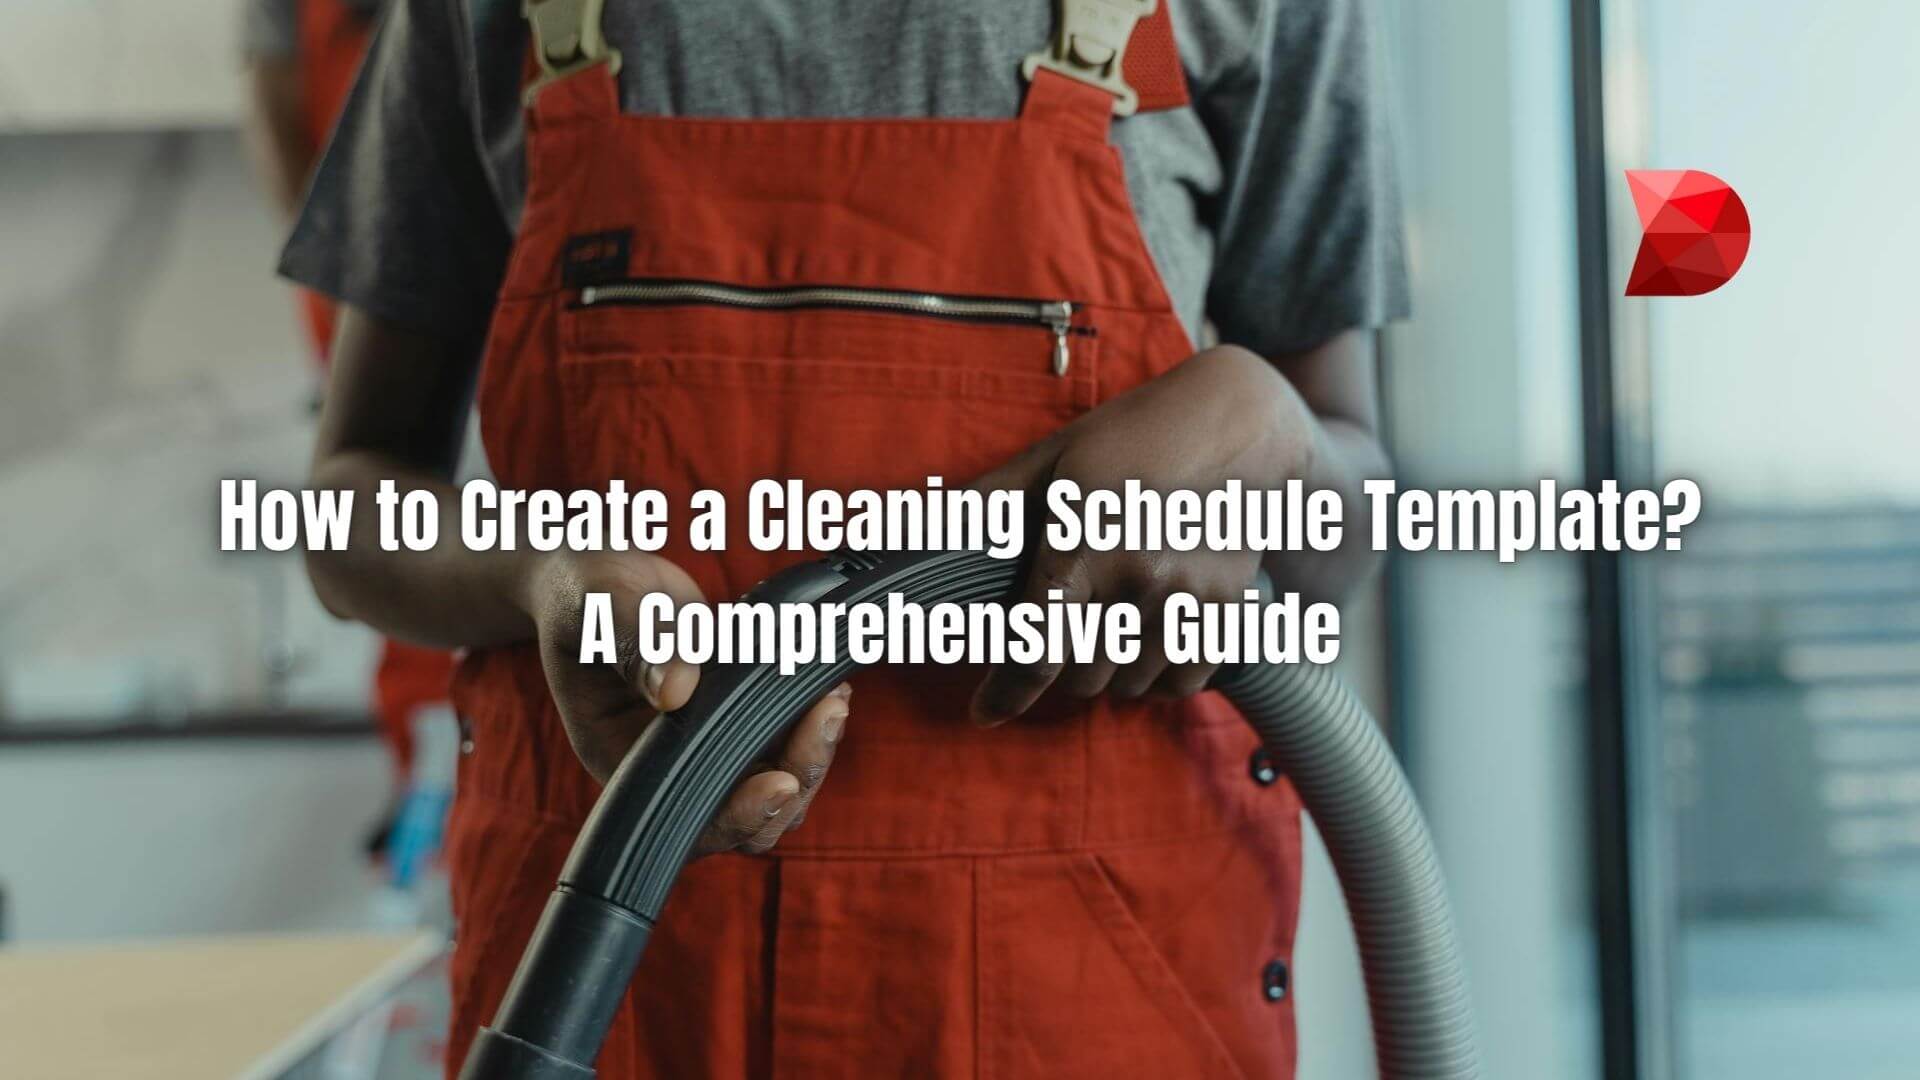 Start organizing your cleaning routine now! Here's how to create a cleaning schedule template that streamlines your routine efficiently.